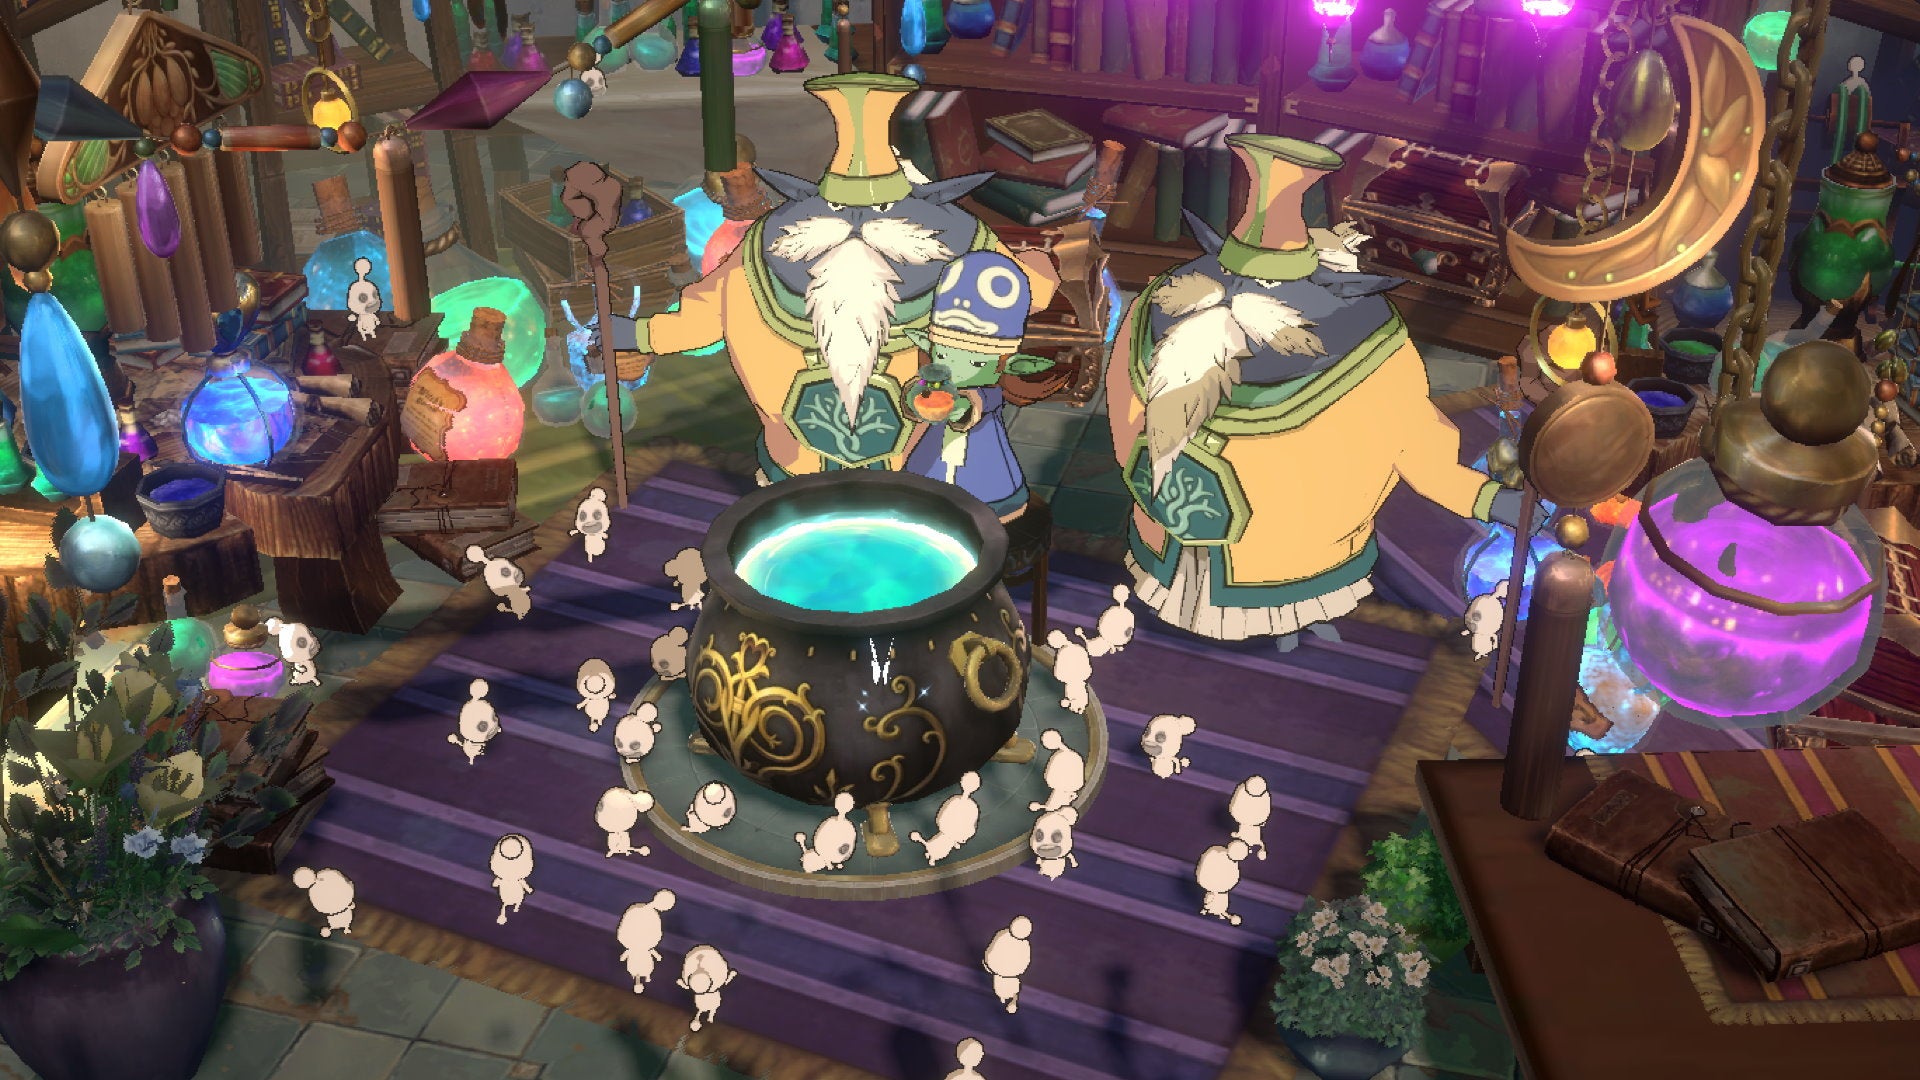 A small mage holds a potion over a cauldron surrounded by lots of small white sprites in Ni No Kuni: Cross Worlds